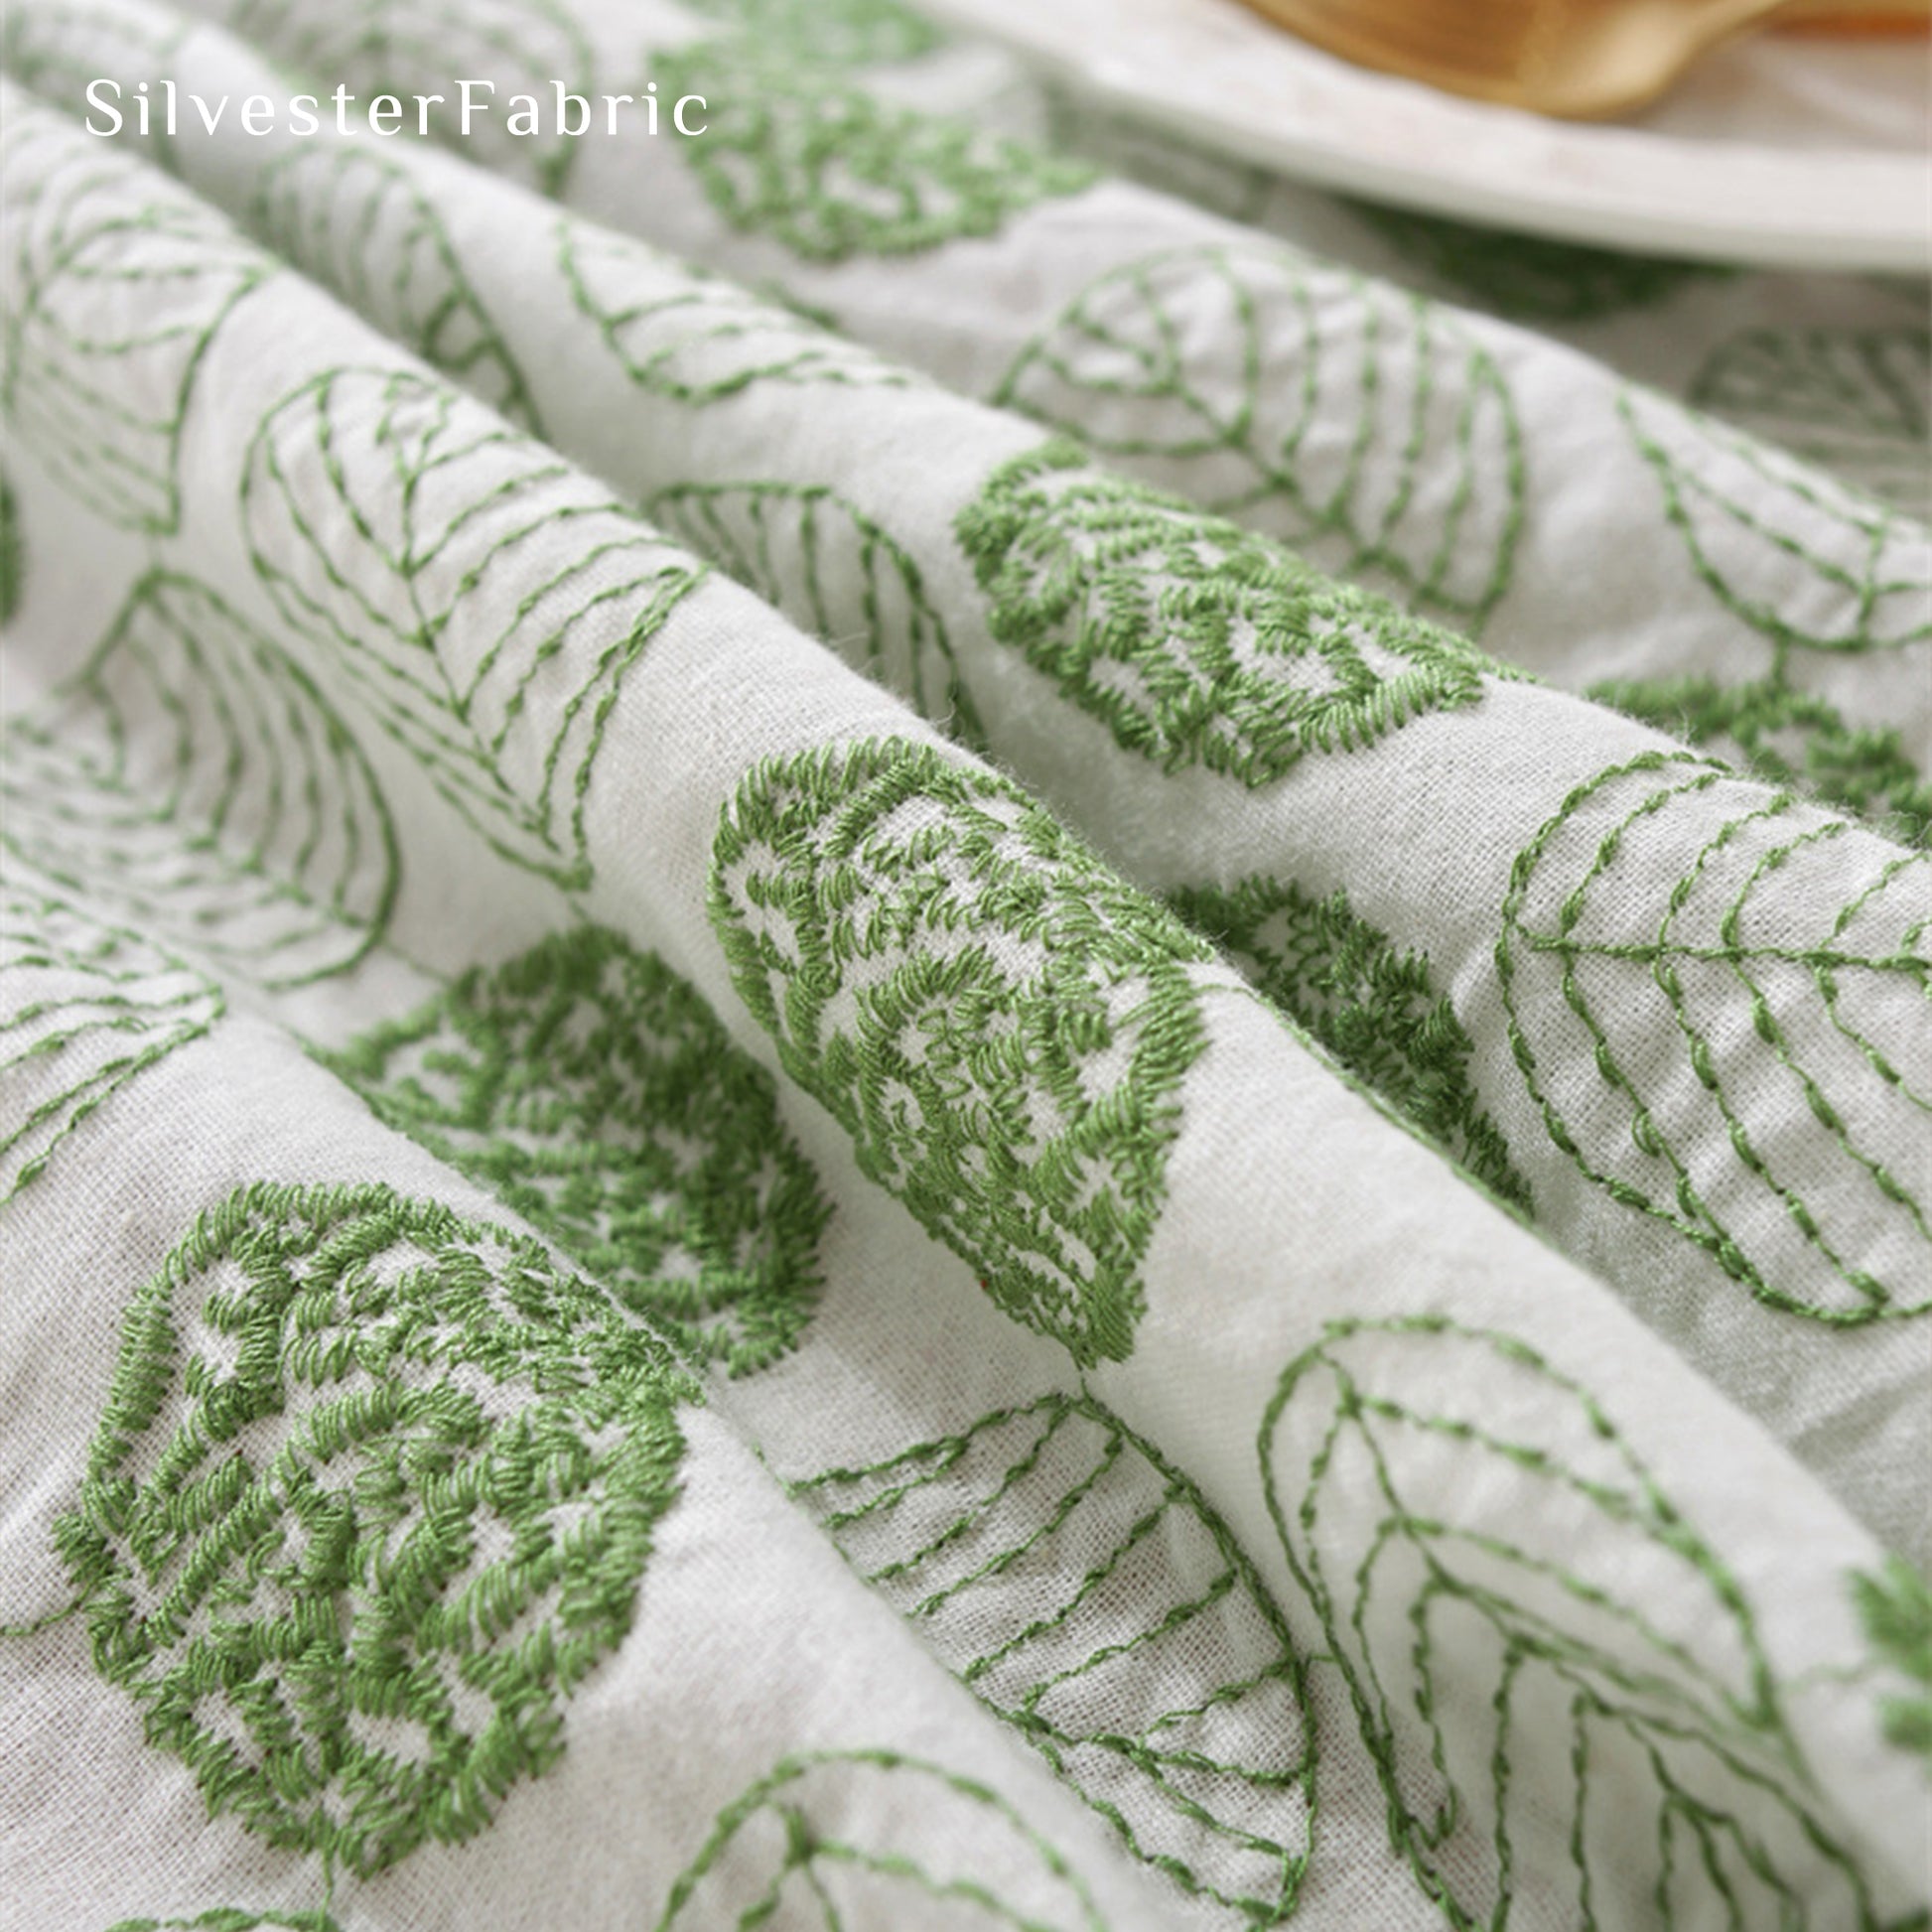 Leaf Embroidered White Tablecloth丨Free Shipping - Silvester Fabric